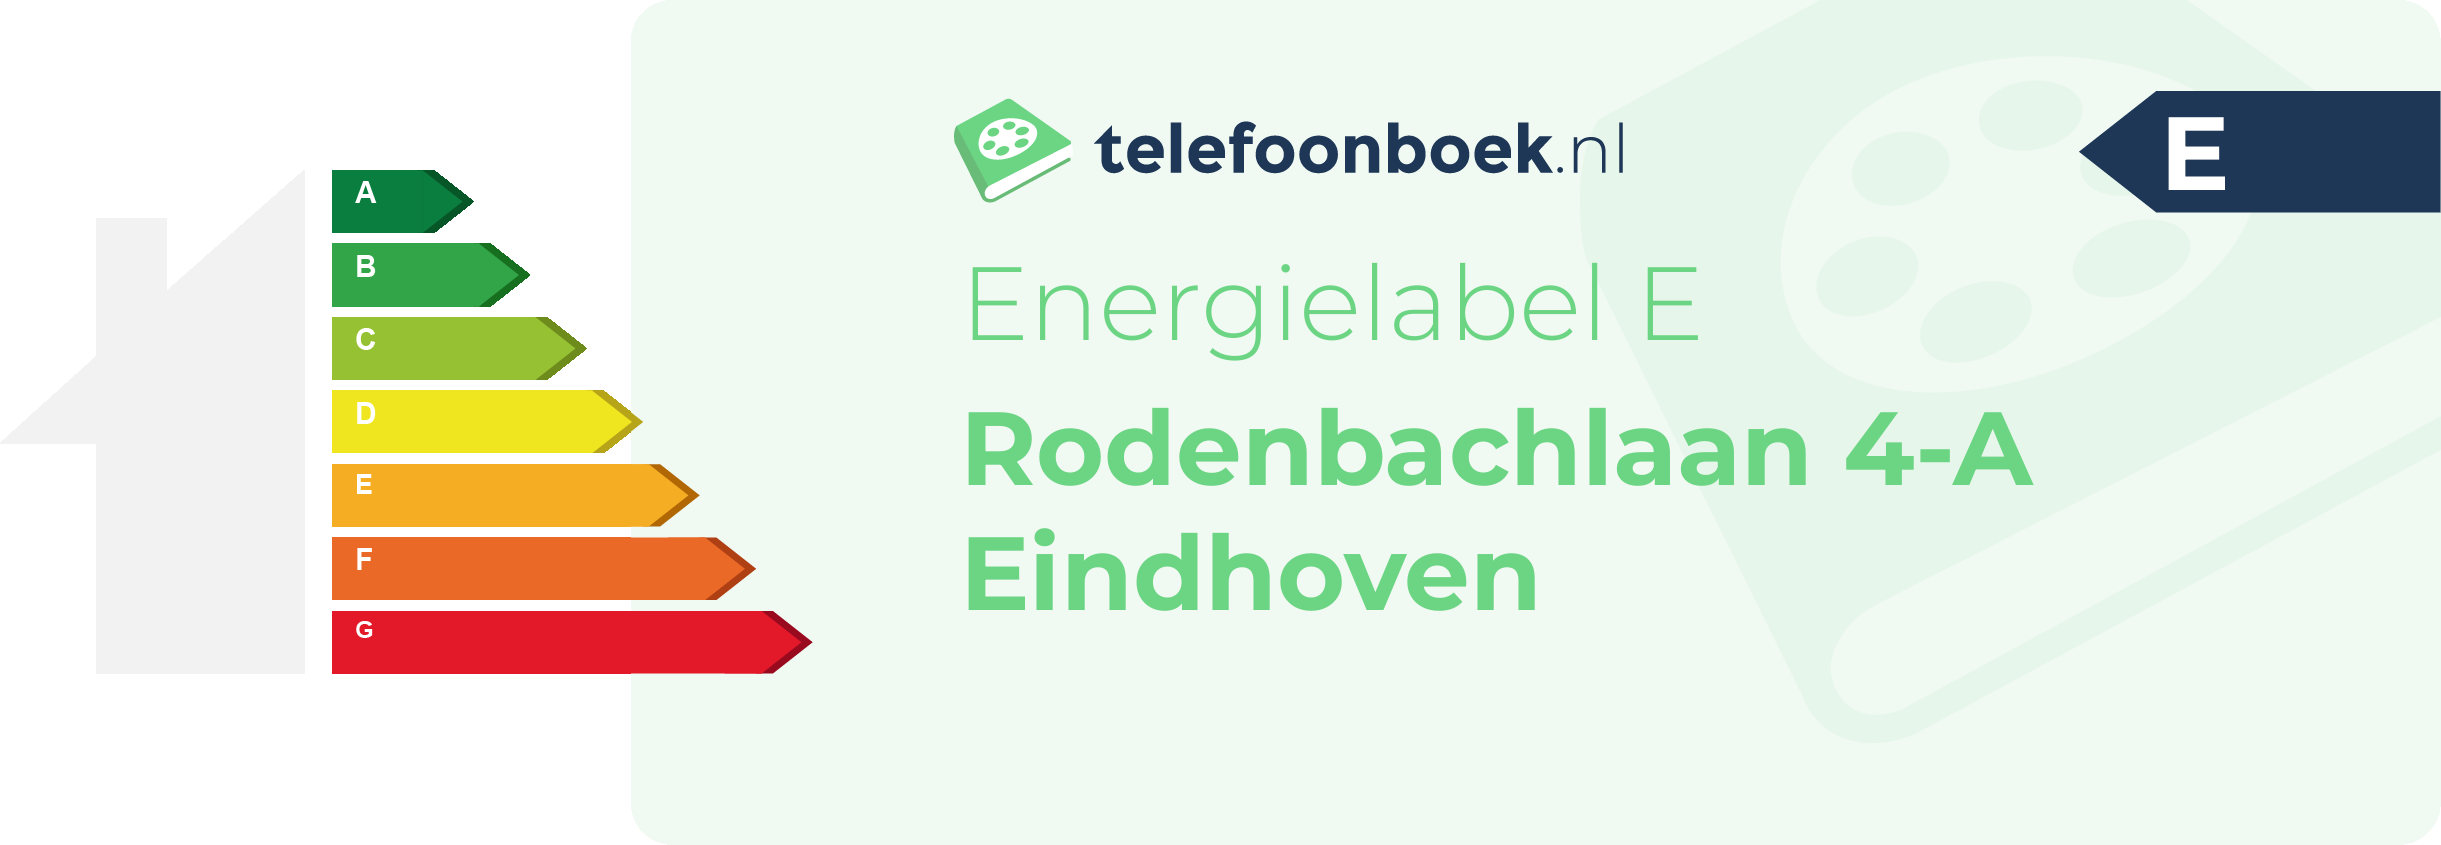 Energielabel Rodenbachlaan 4-A Eindhoven